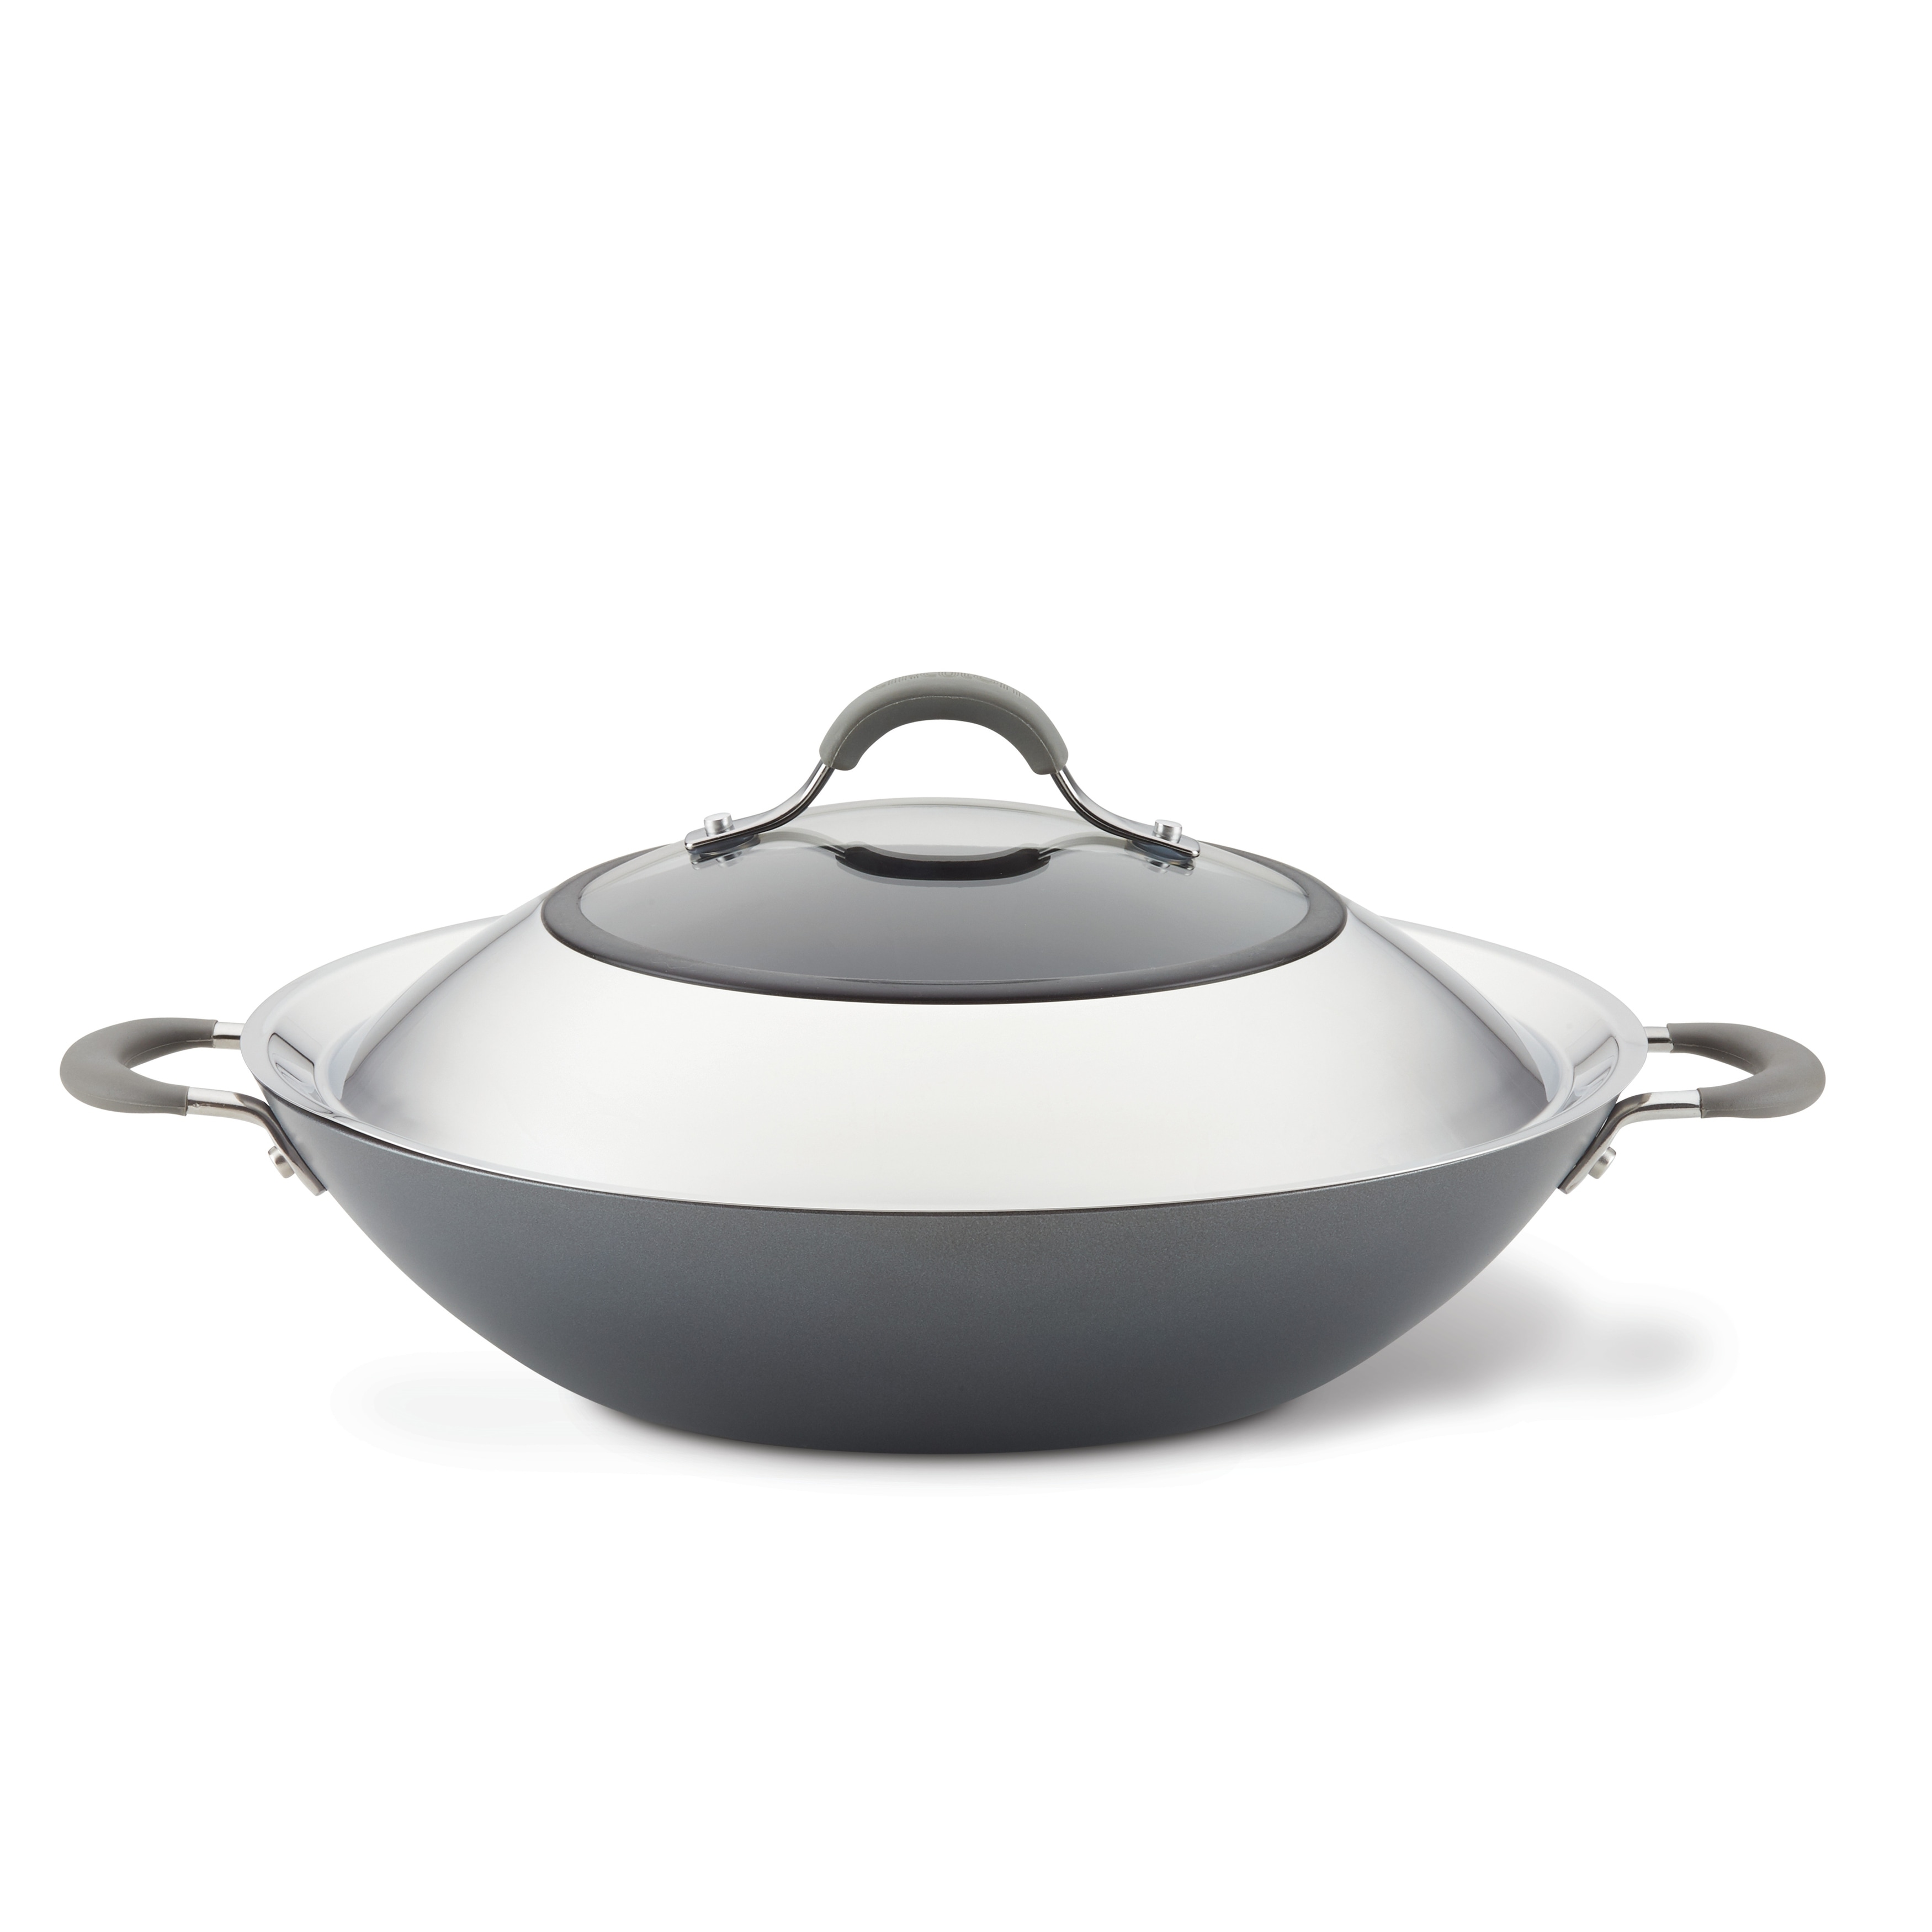 Circulon SteelShield Wok with Glass Lid Review